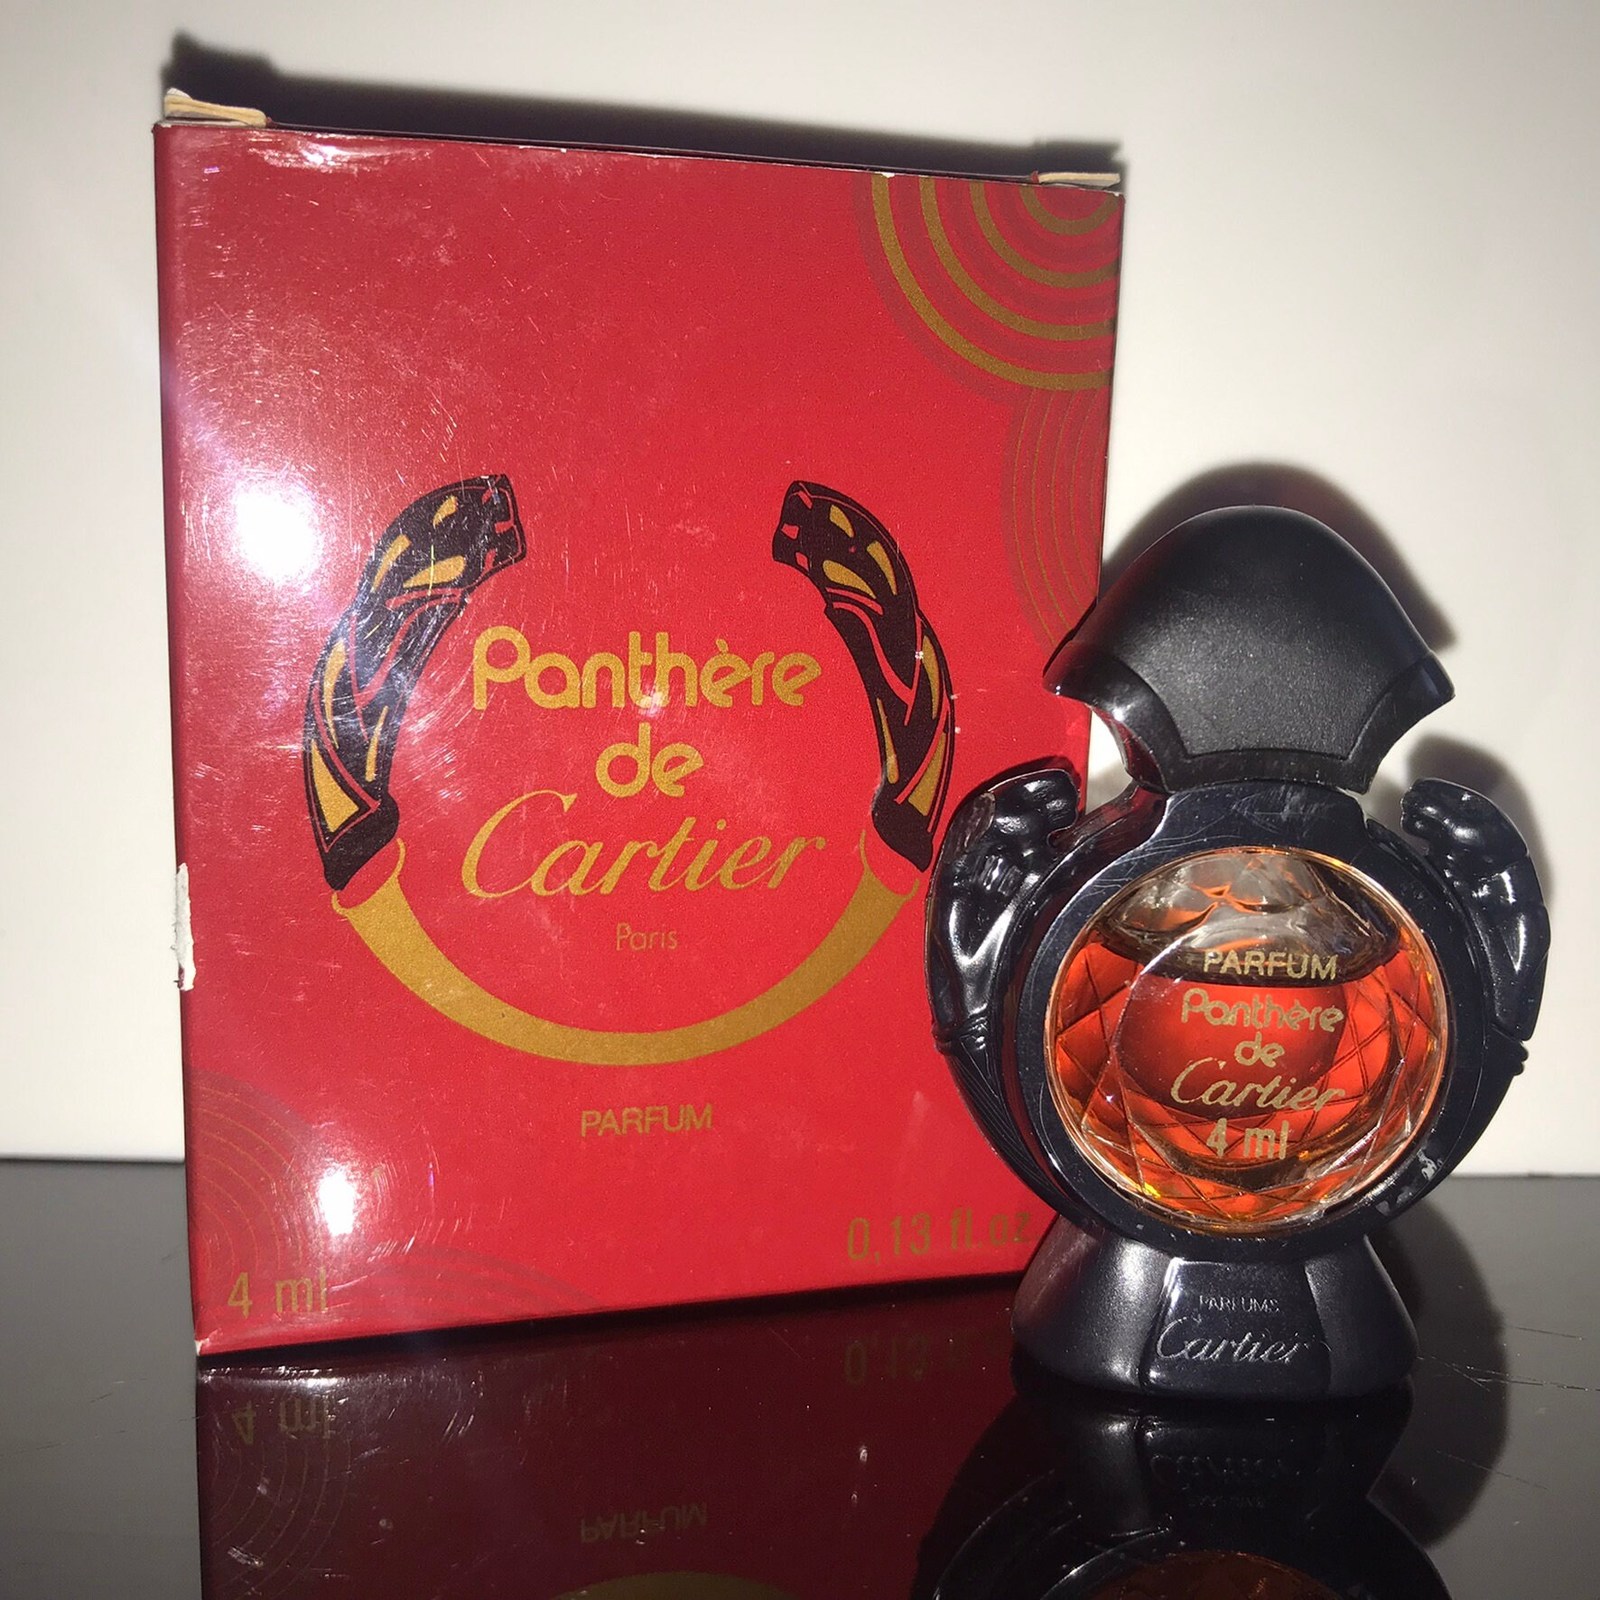 Cartier Panthere de Cartier pure perfume 4 ml  Year: 1986 extremely rare - reine - $98.00